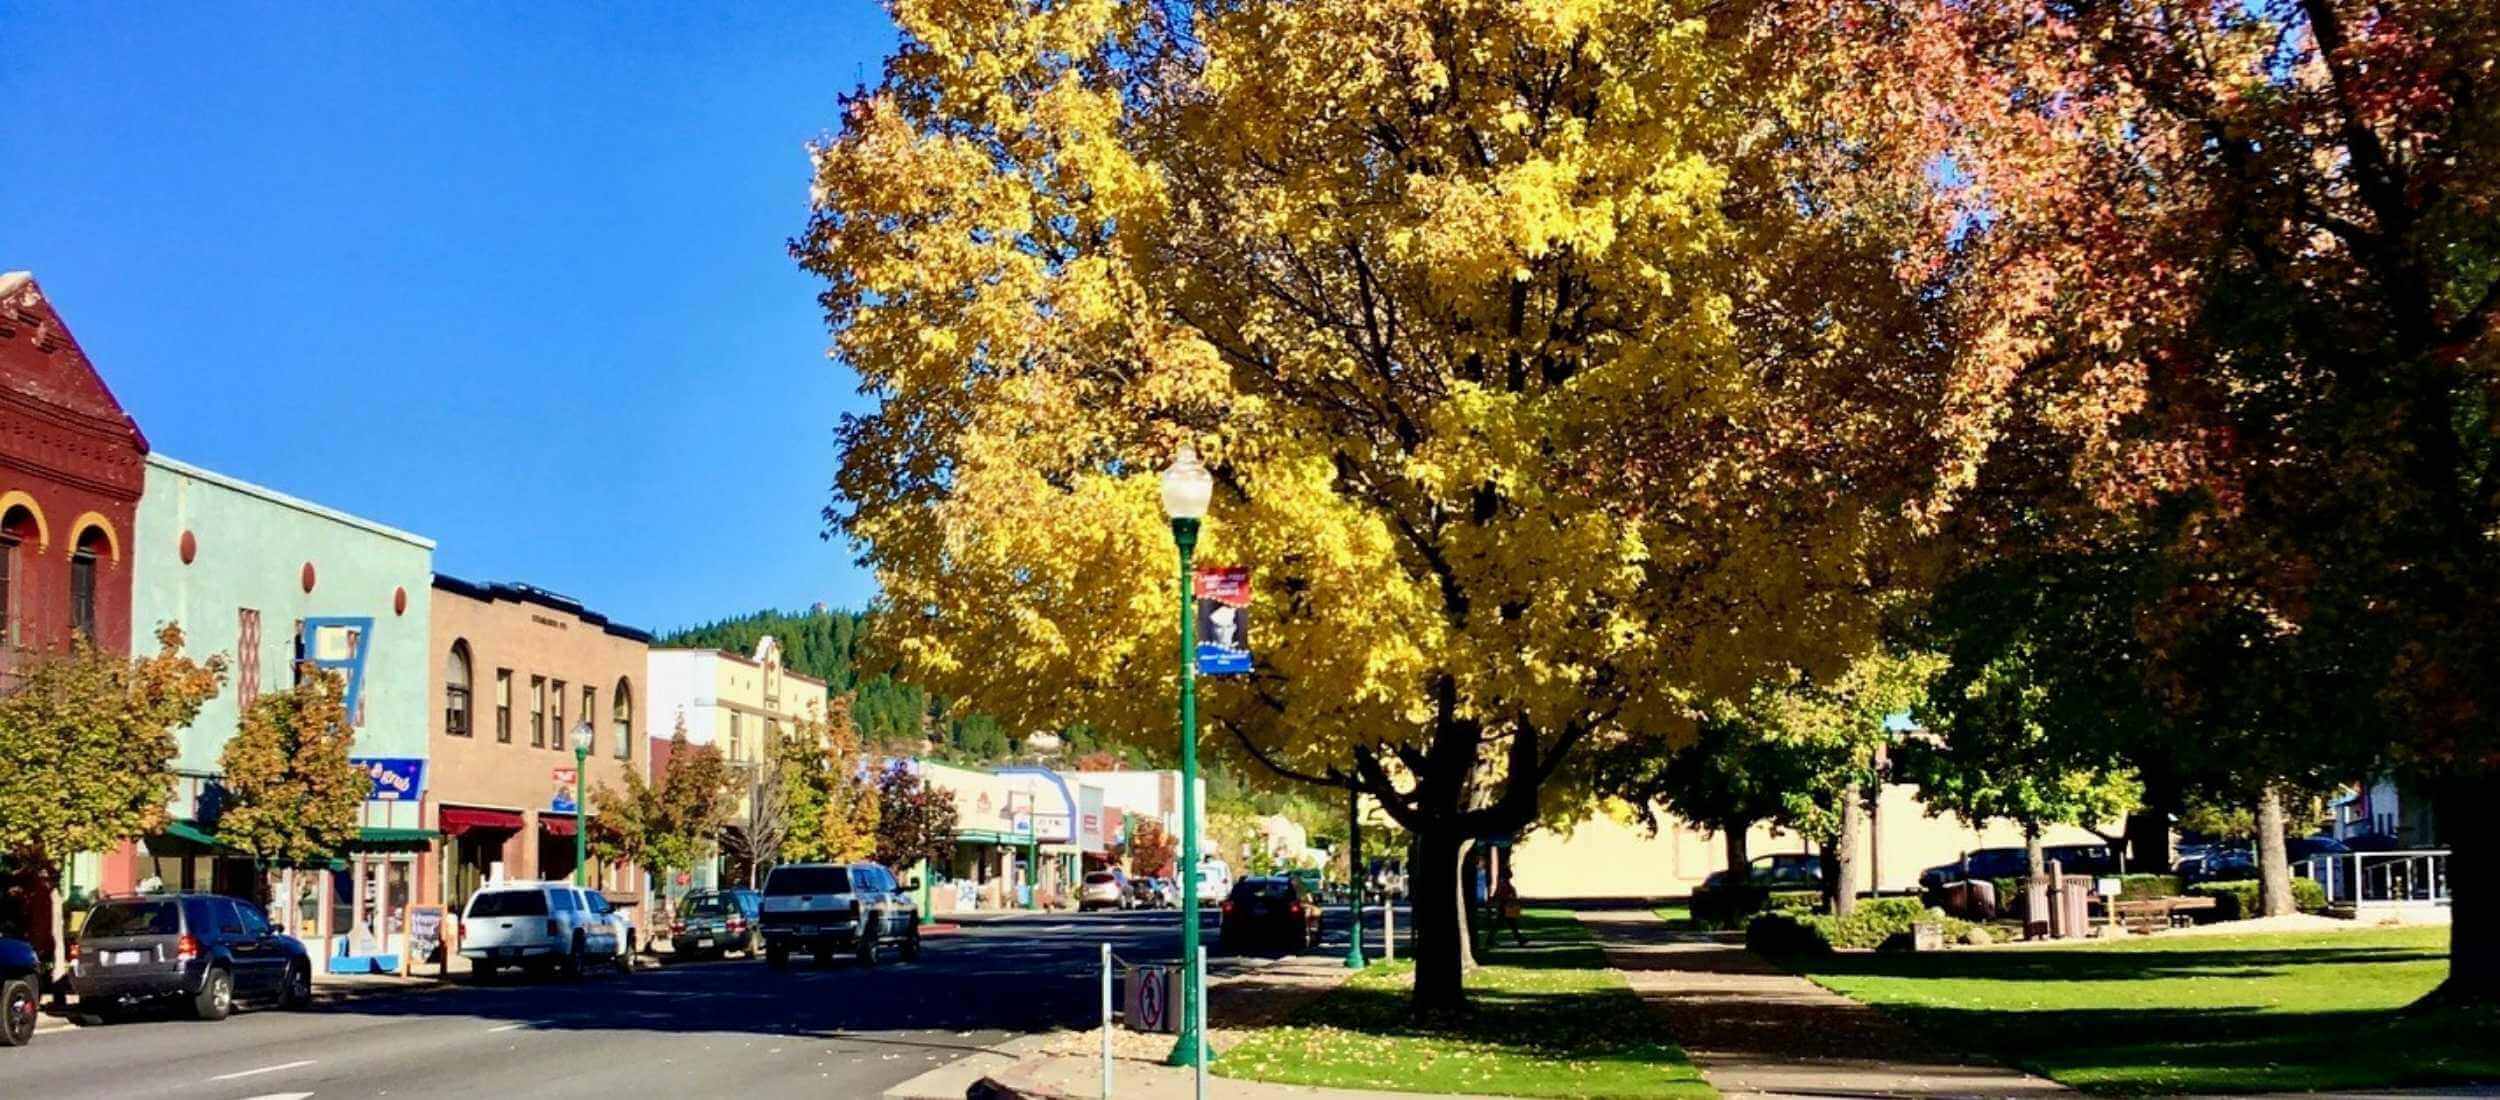 downtown quincy california in the fall